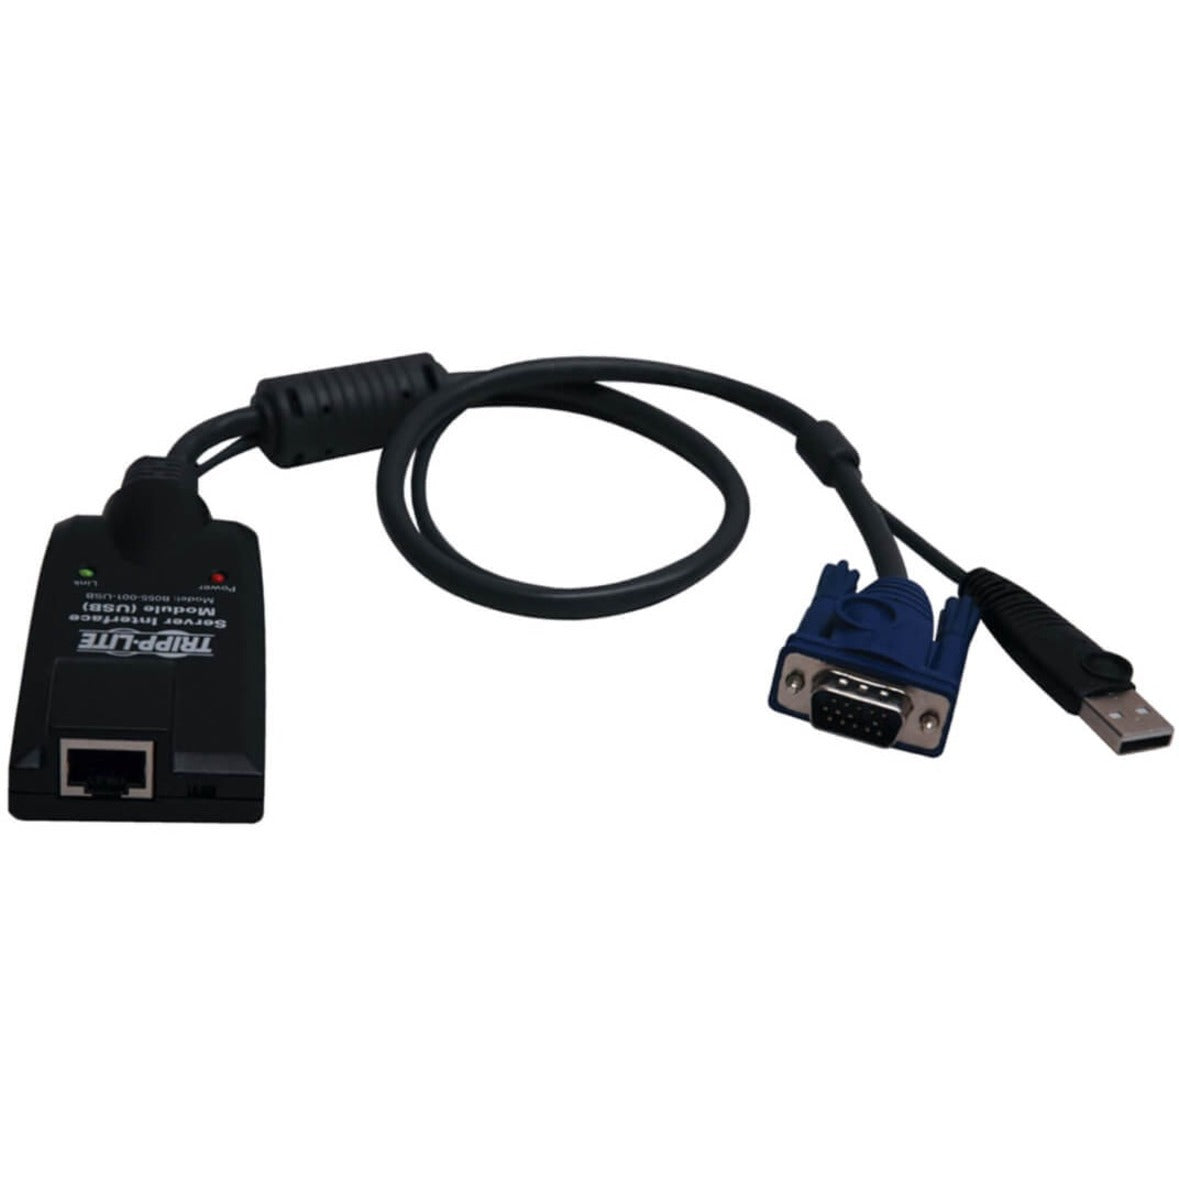 Tripp Lite B055-001-USB-V2 NetDirector Server Interface Module Cable Adapter, Data Transfer Cable